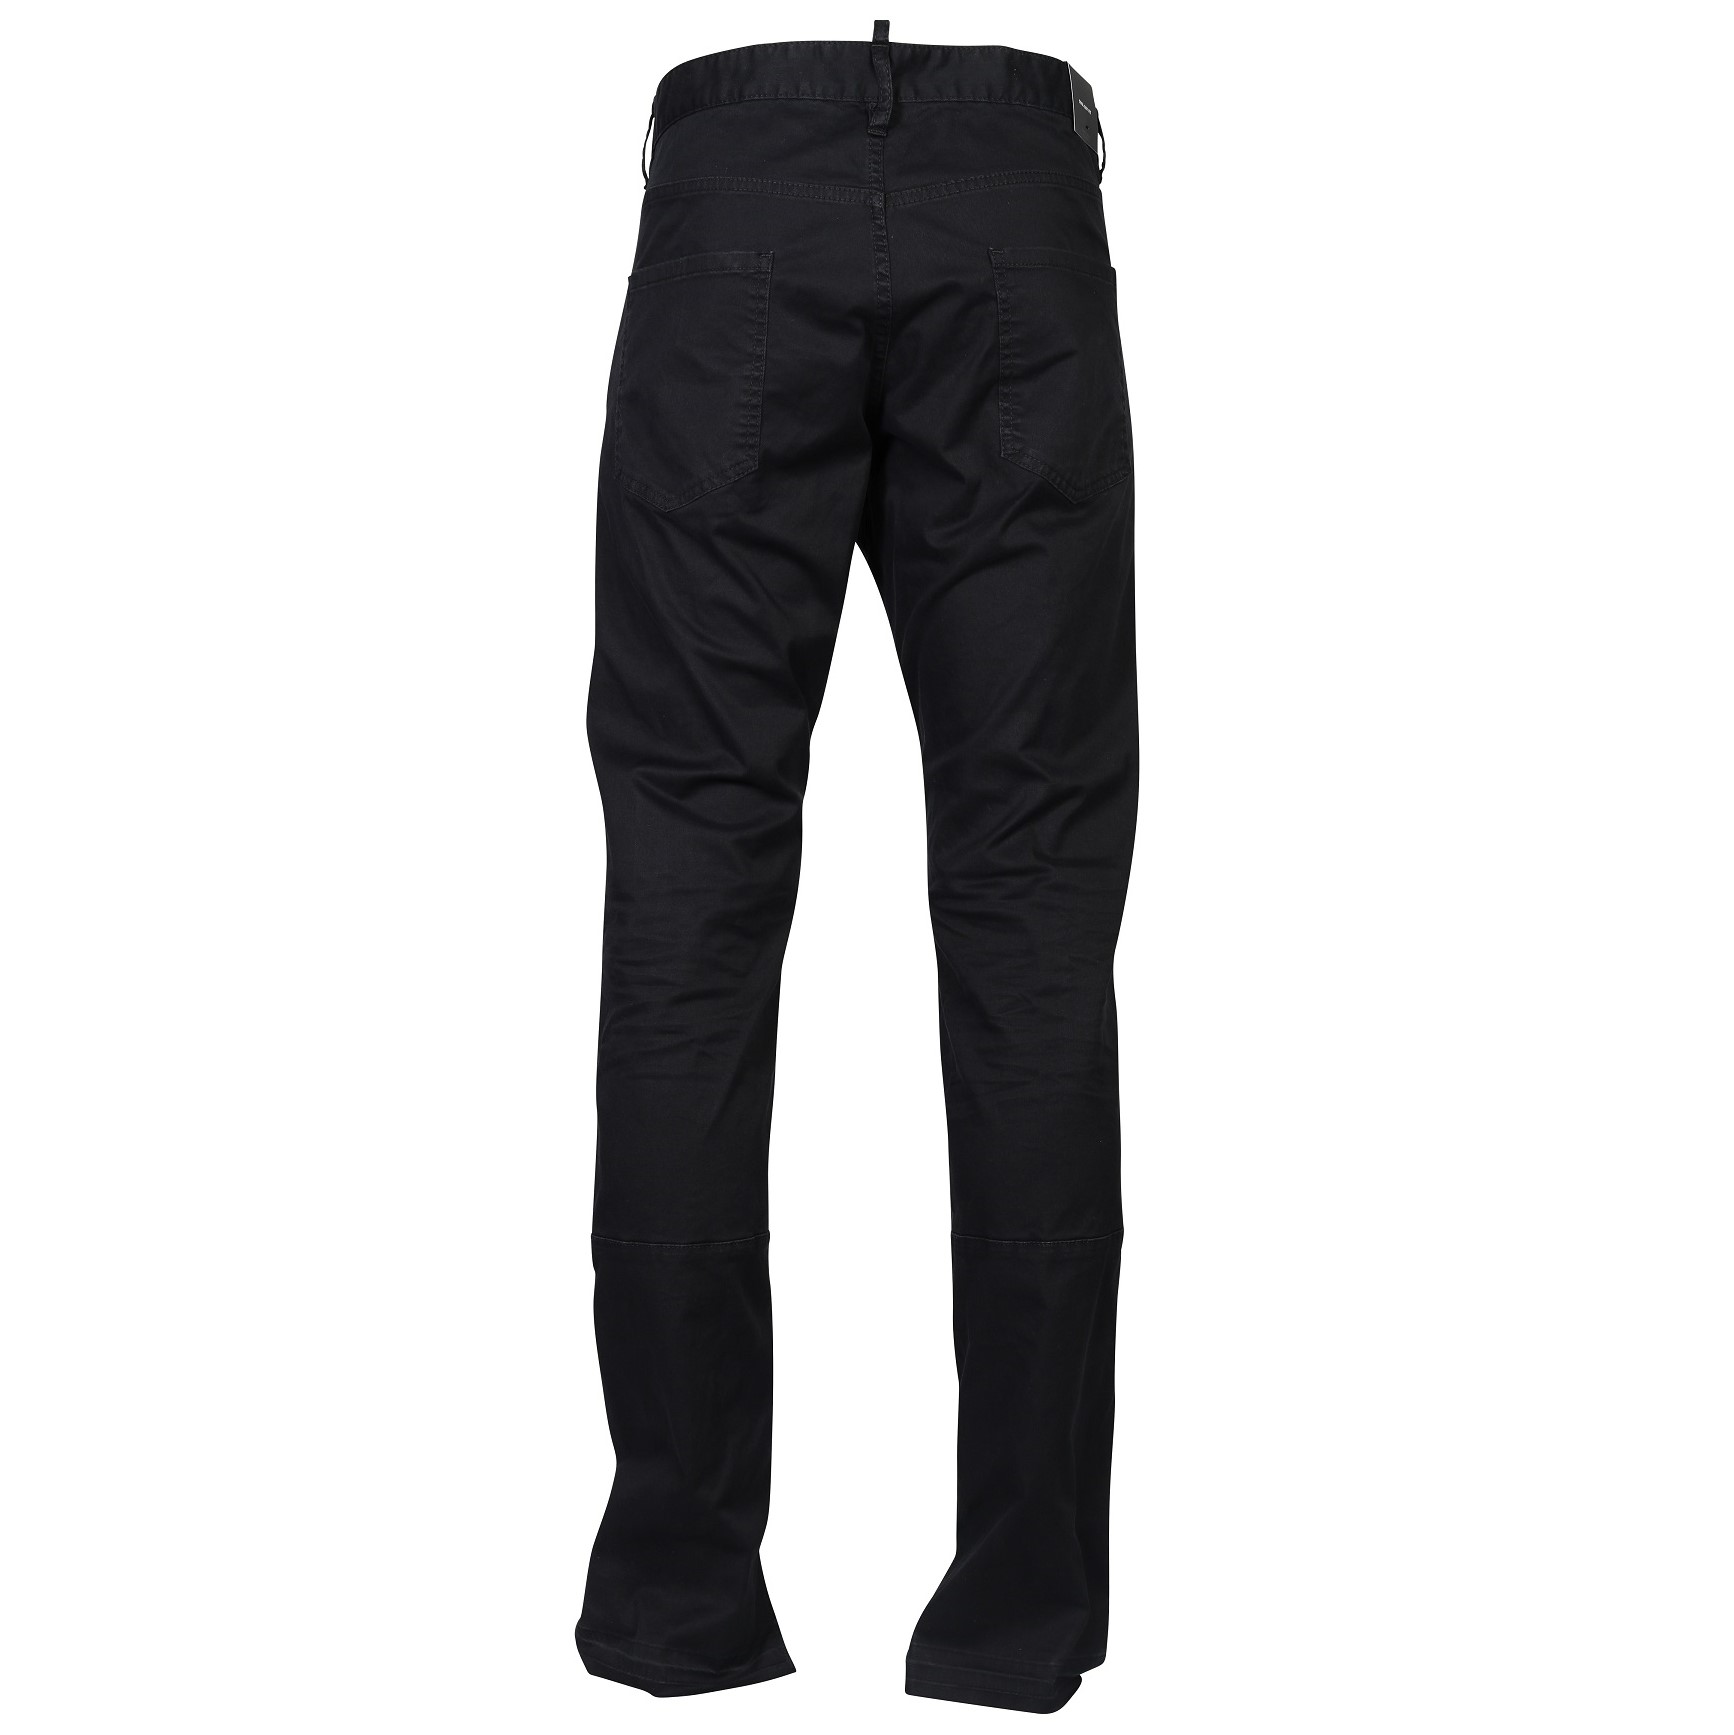 DSQUARED2 Cool Guy Fit Pant in Black